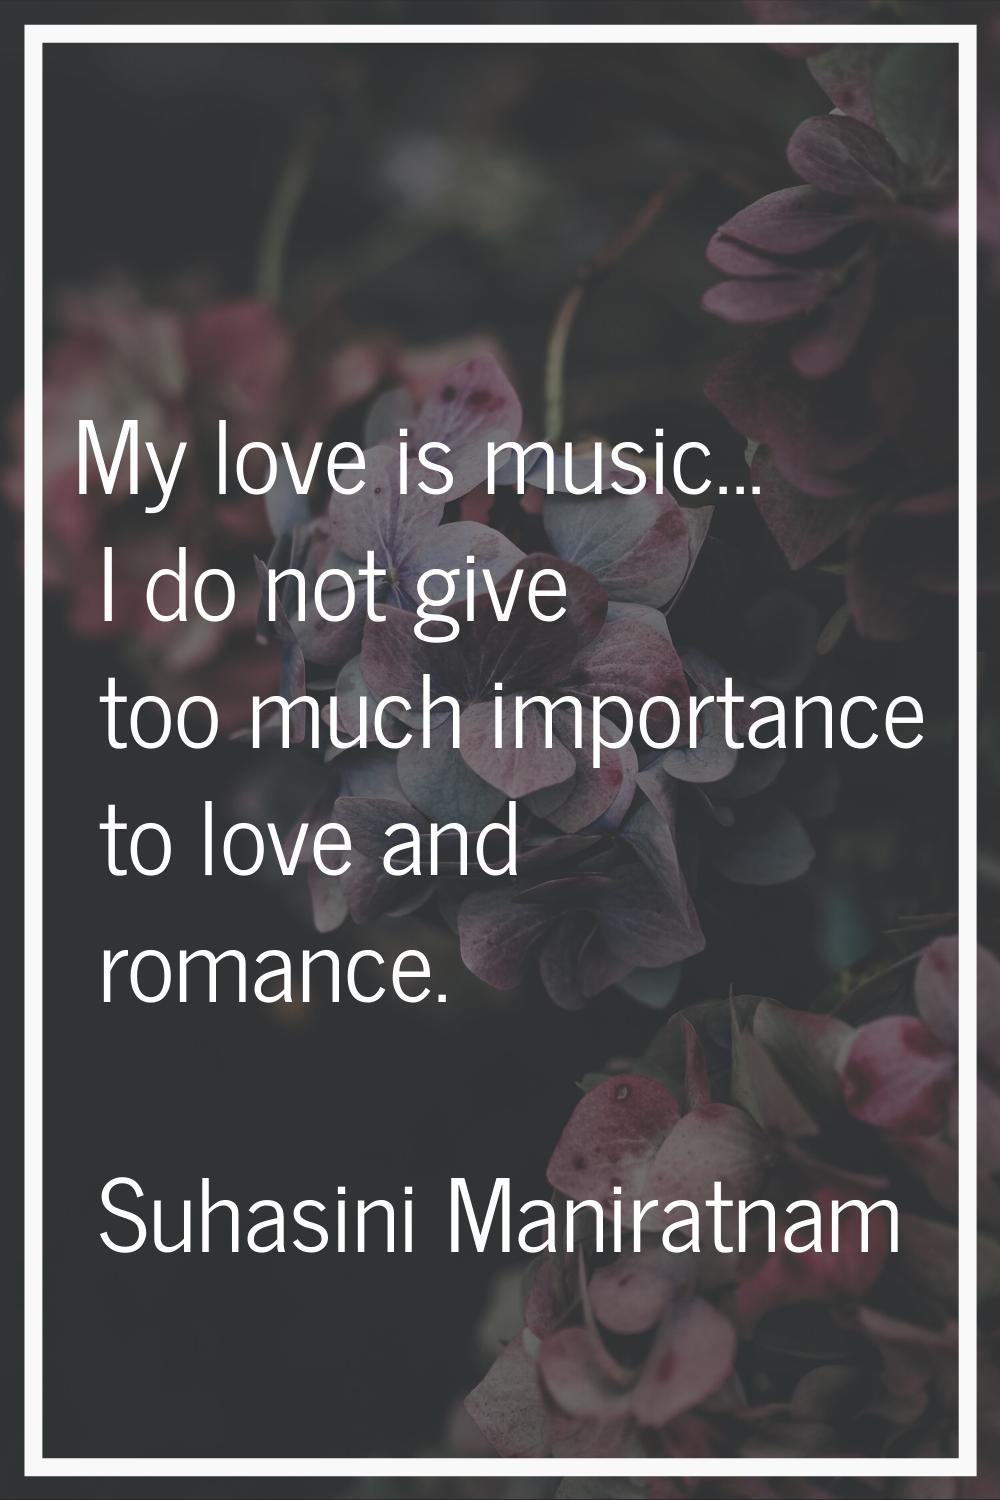 My love is music... I do not give too much importance to love and romance.